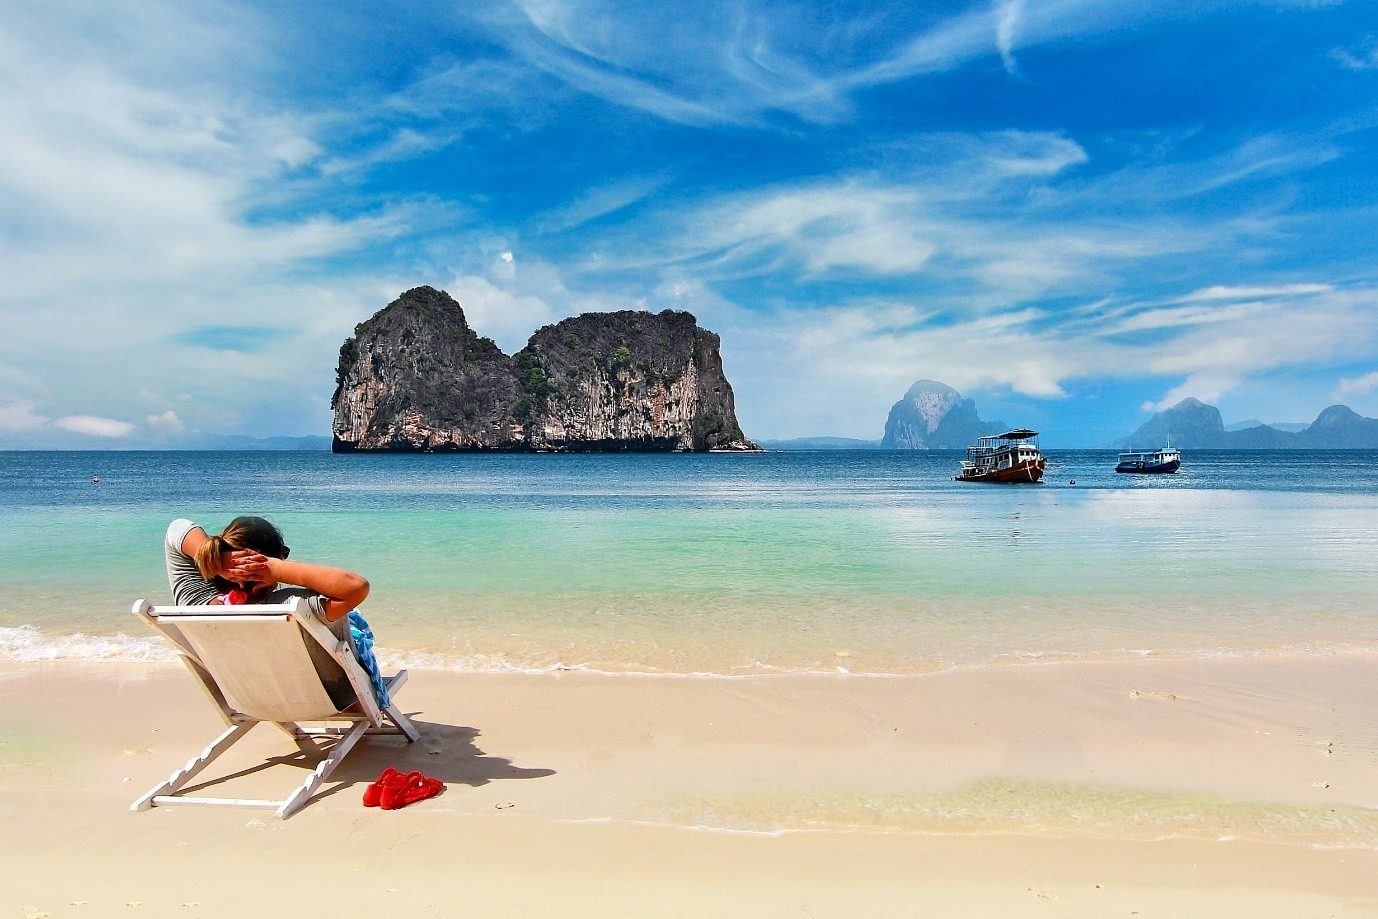 Man lounging on a beach in Thailand